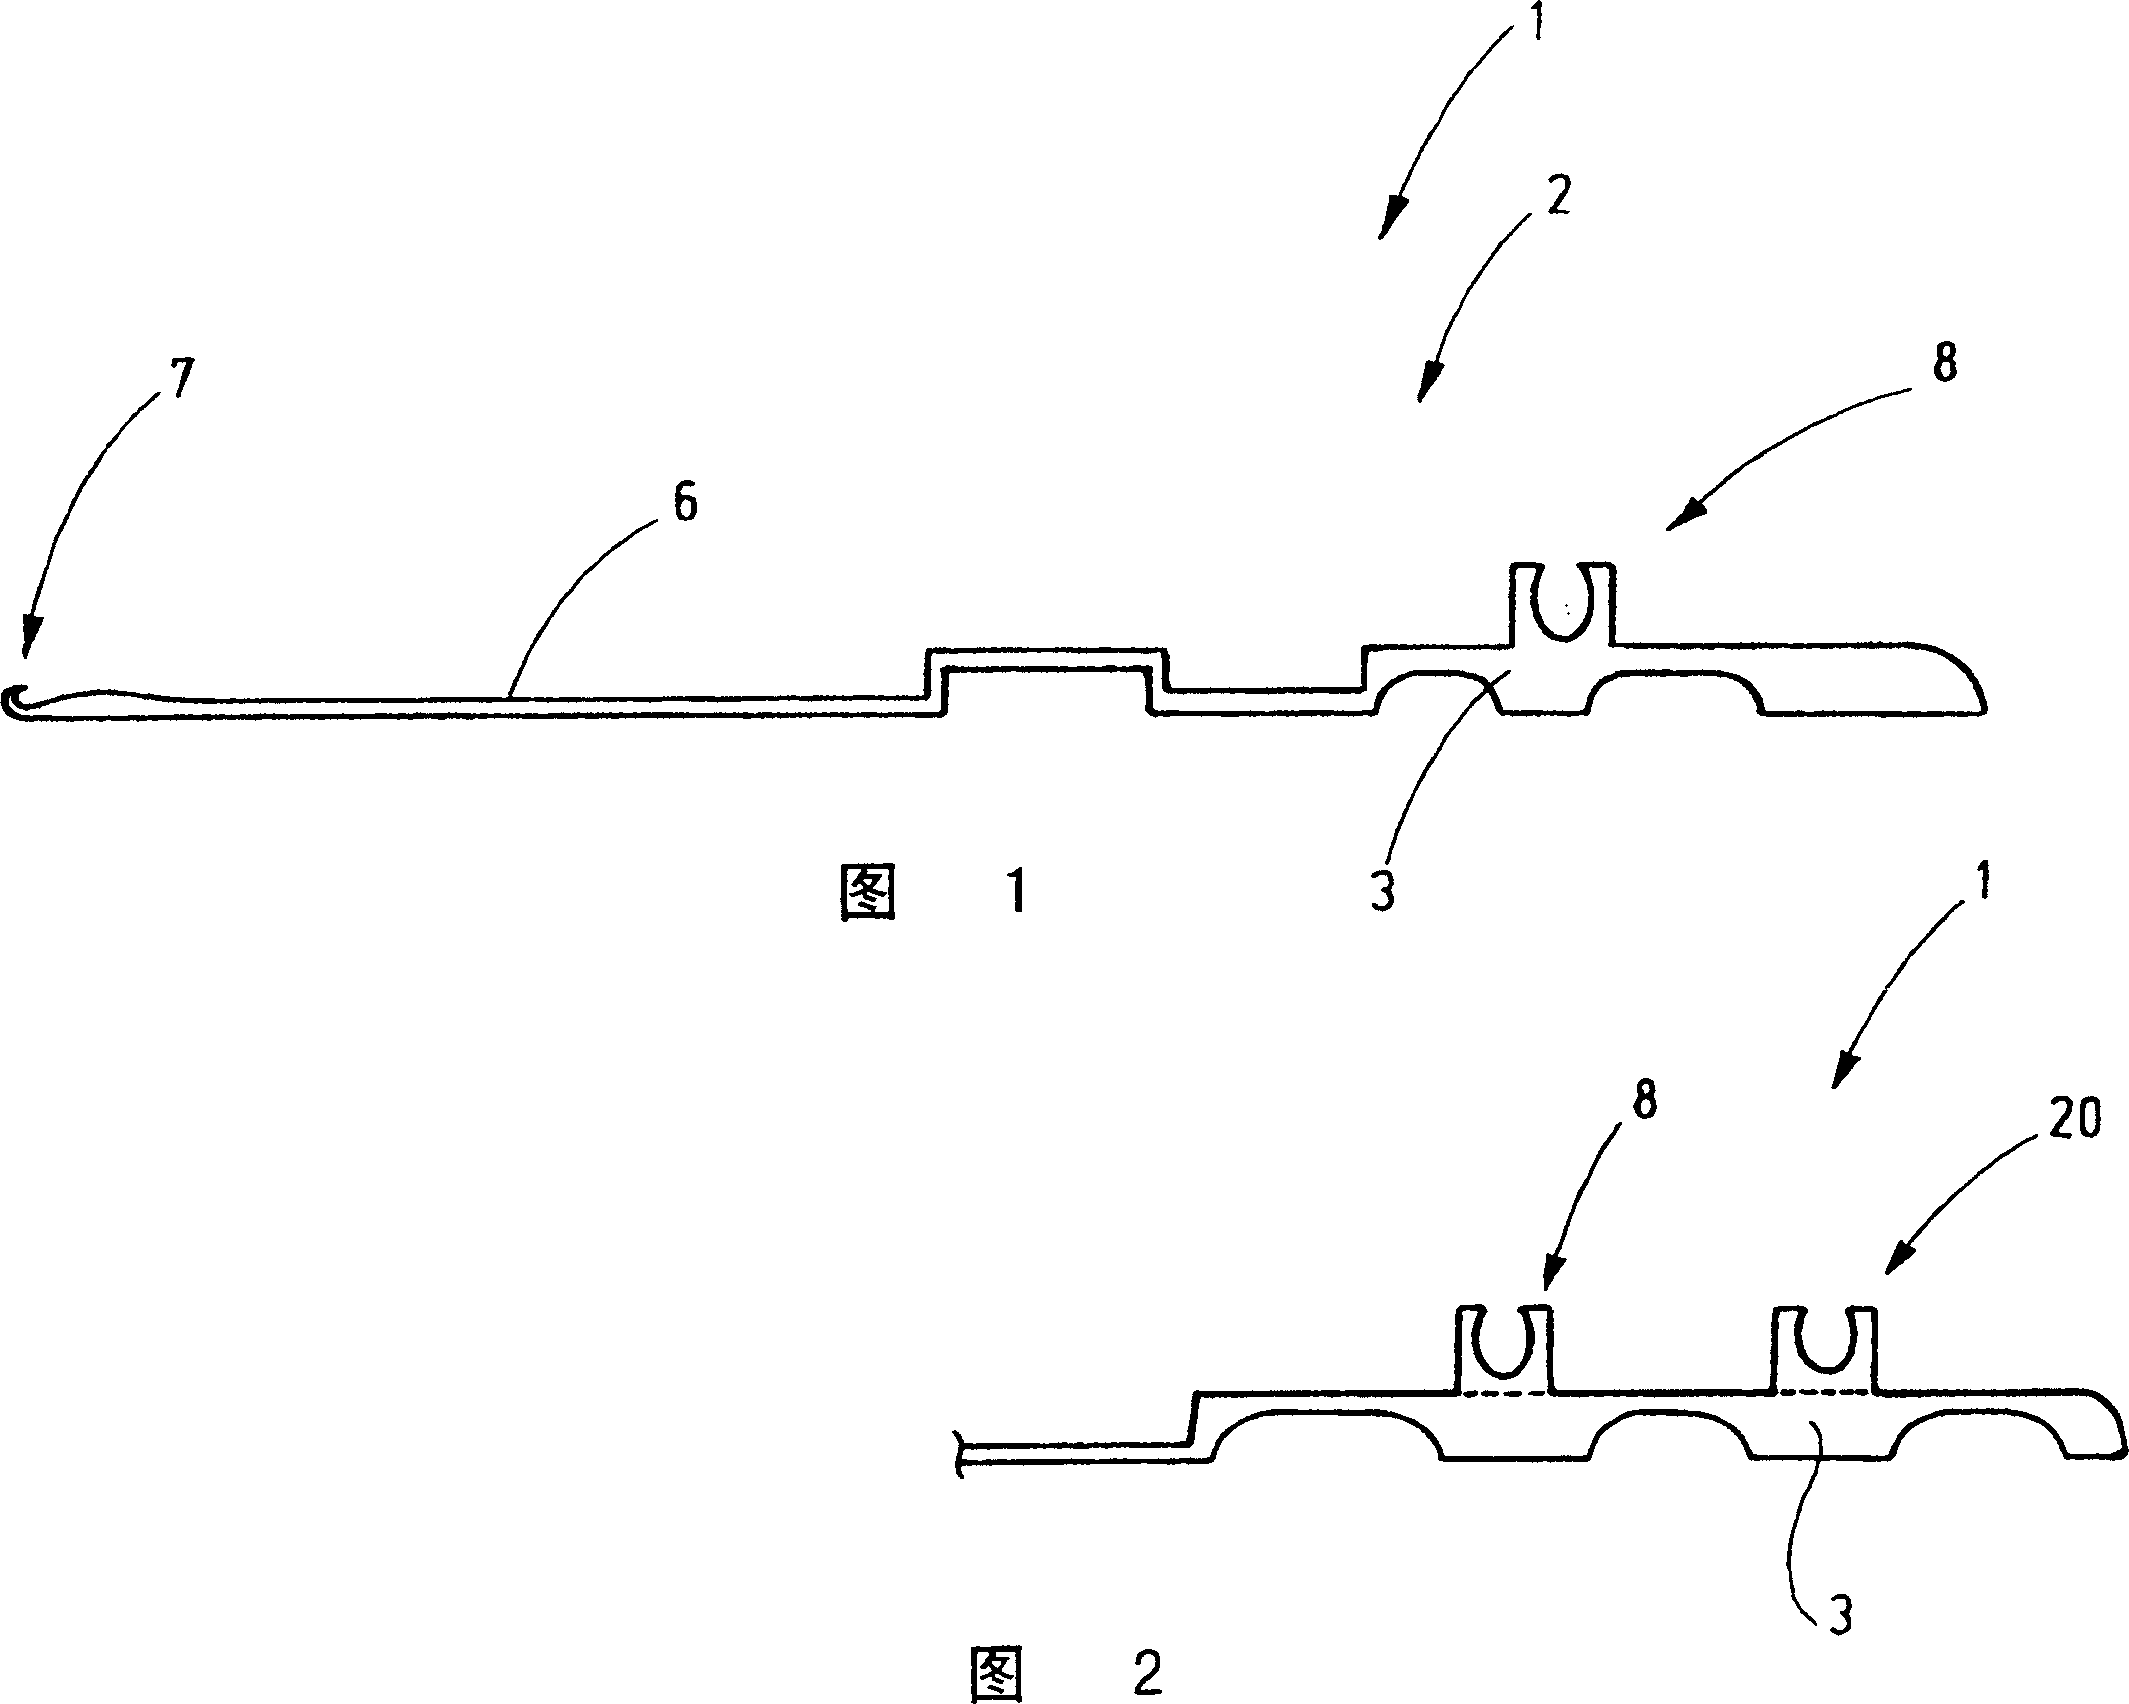 System component for a knitting system, and handling process